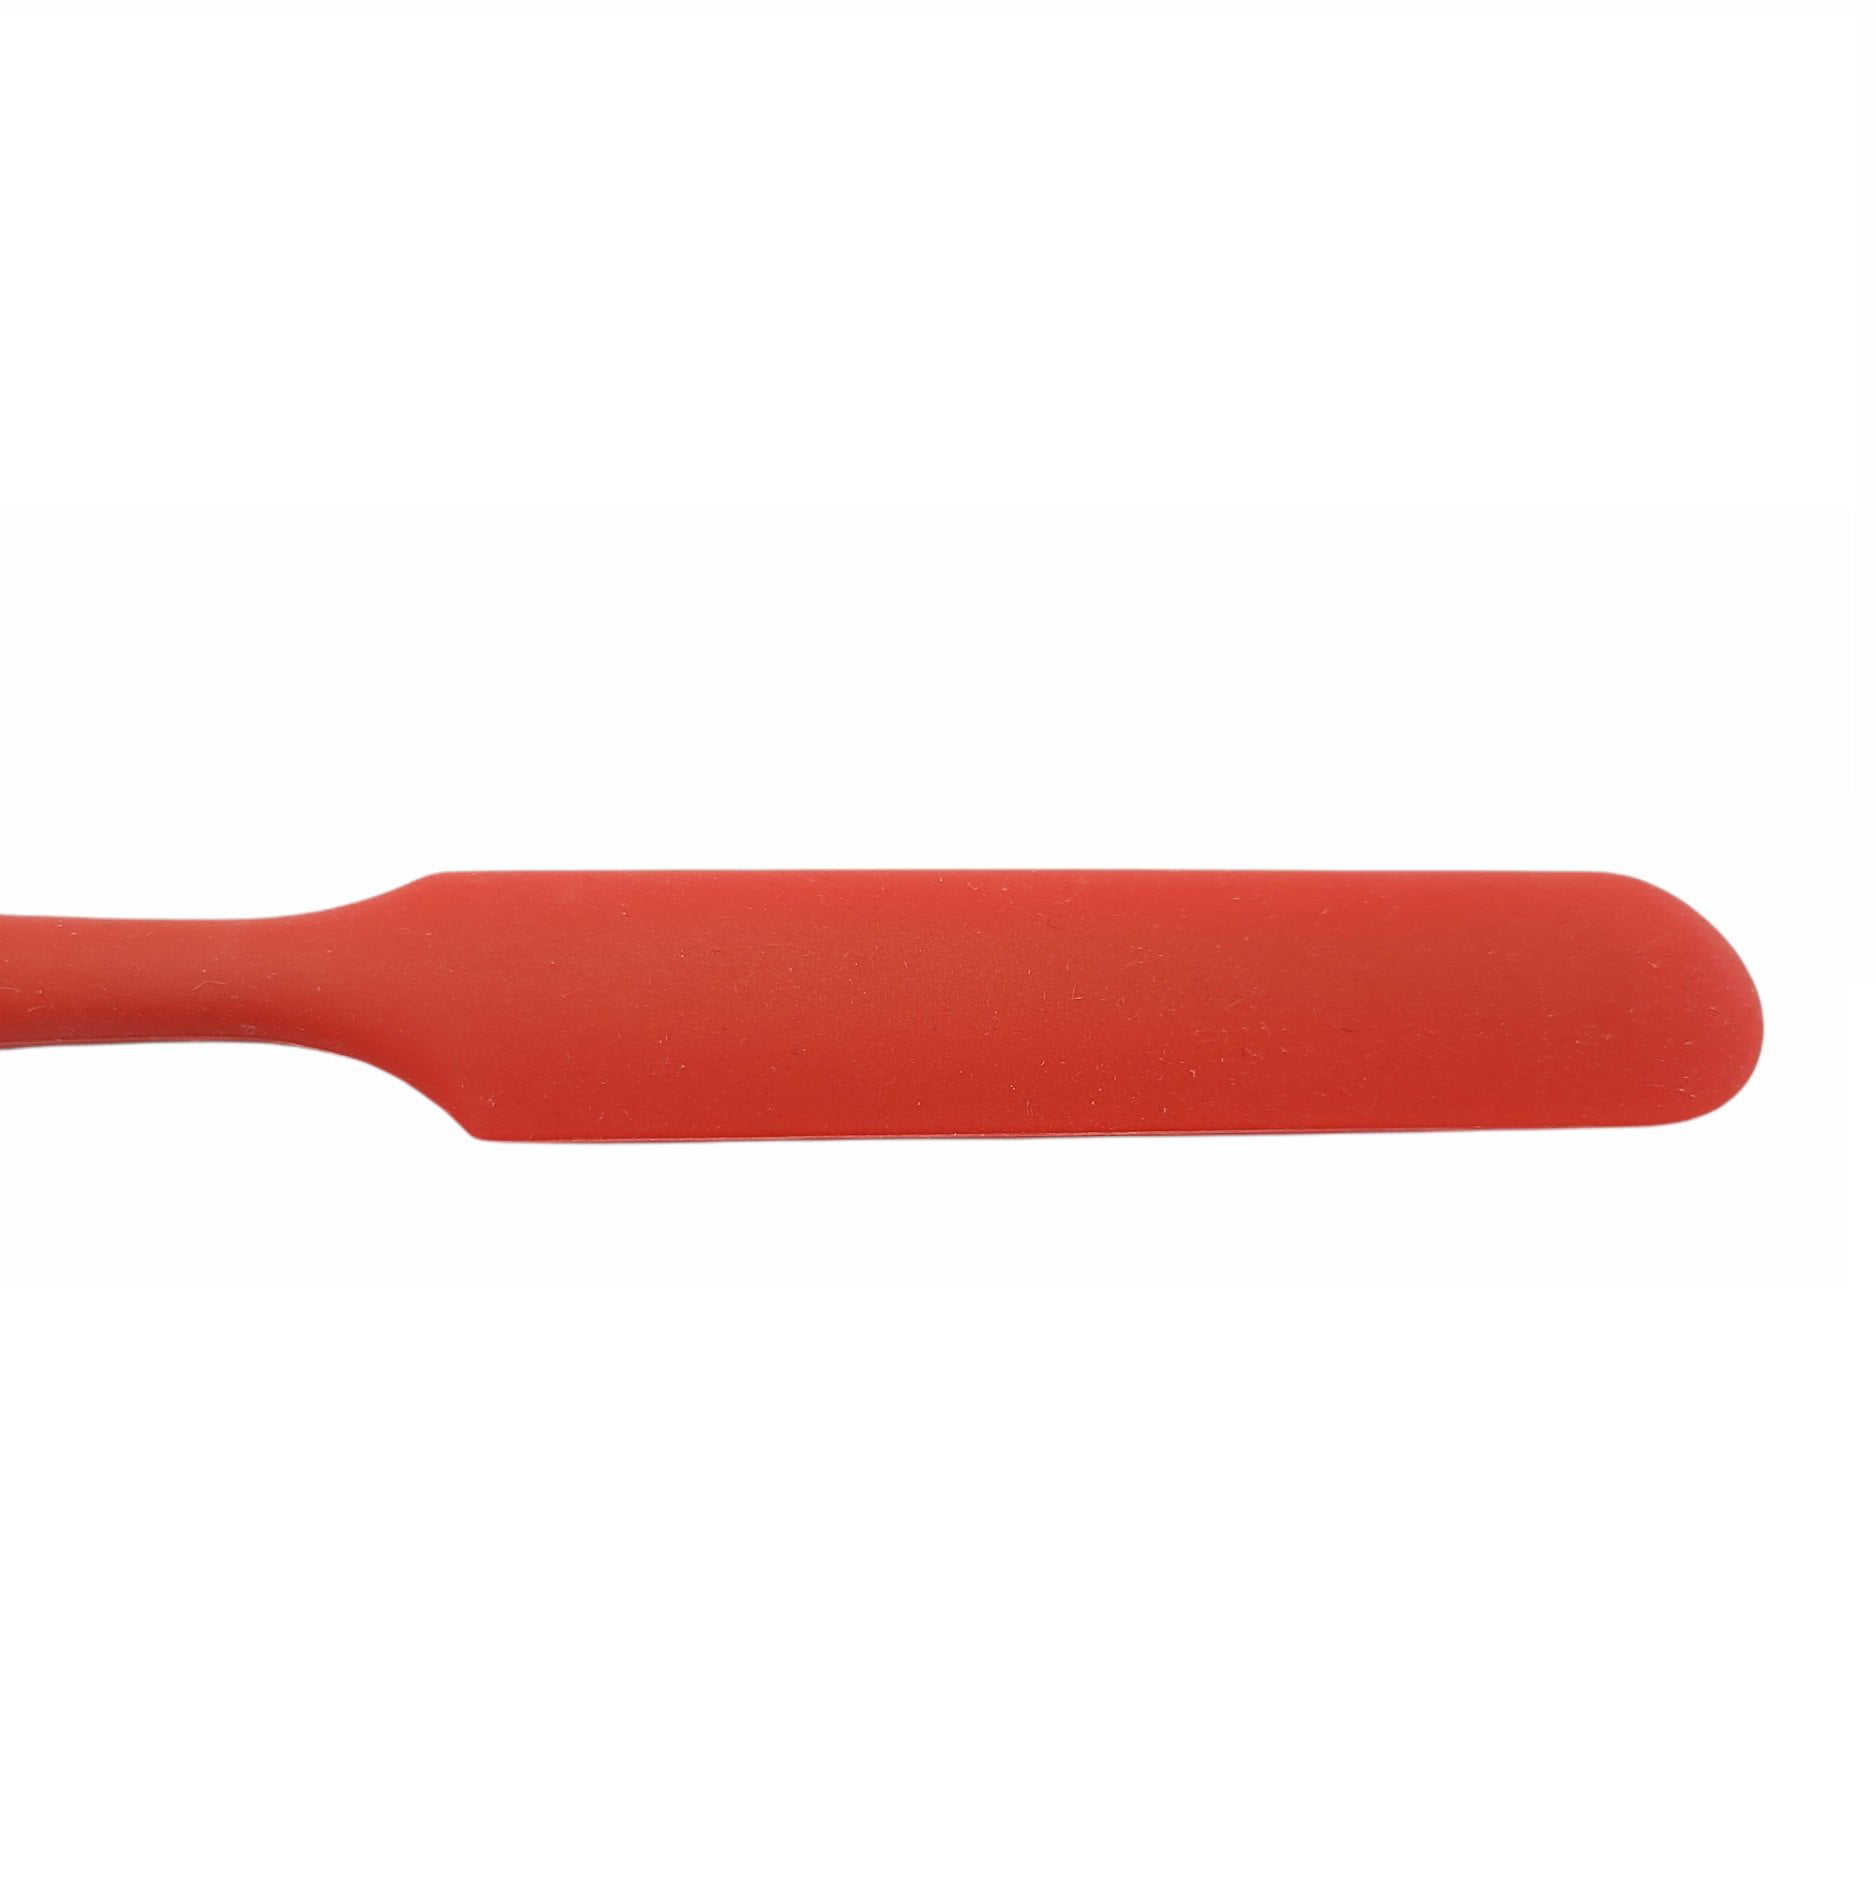 Handy Housewares 9.5 Long Silicone Spatula Spreader, Bowl or Jar Scraper, Great for Spreading Frosting or Icing on Cakes (1, Orange)